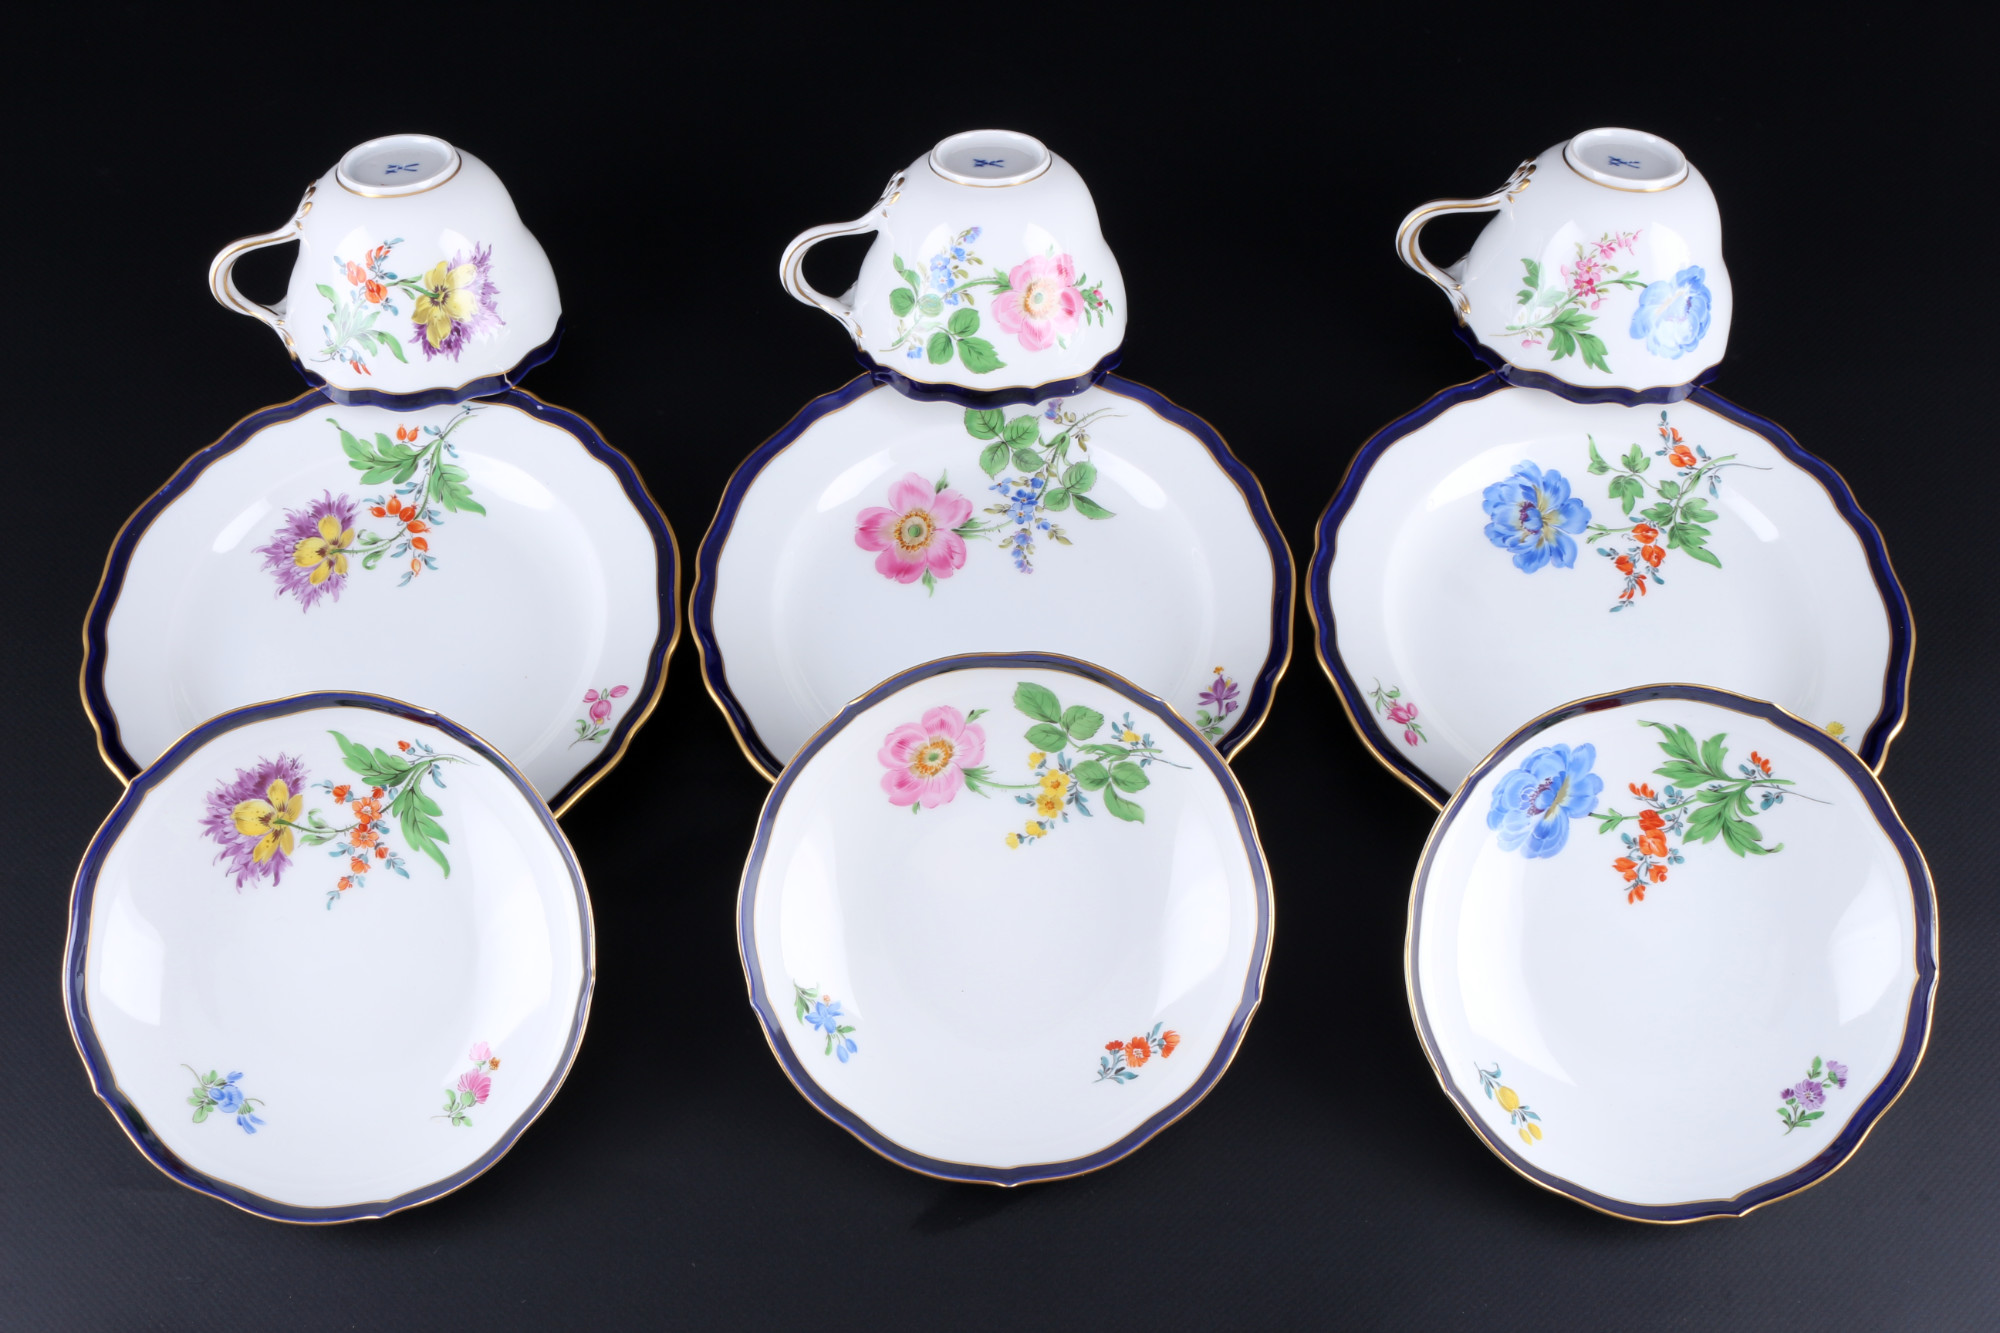 Meissen Flowers with Royal Blue Rim coffee service for 6 persons, Kaffeeservice für 6 Personen, - Image 3 of 6